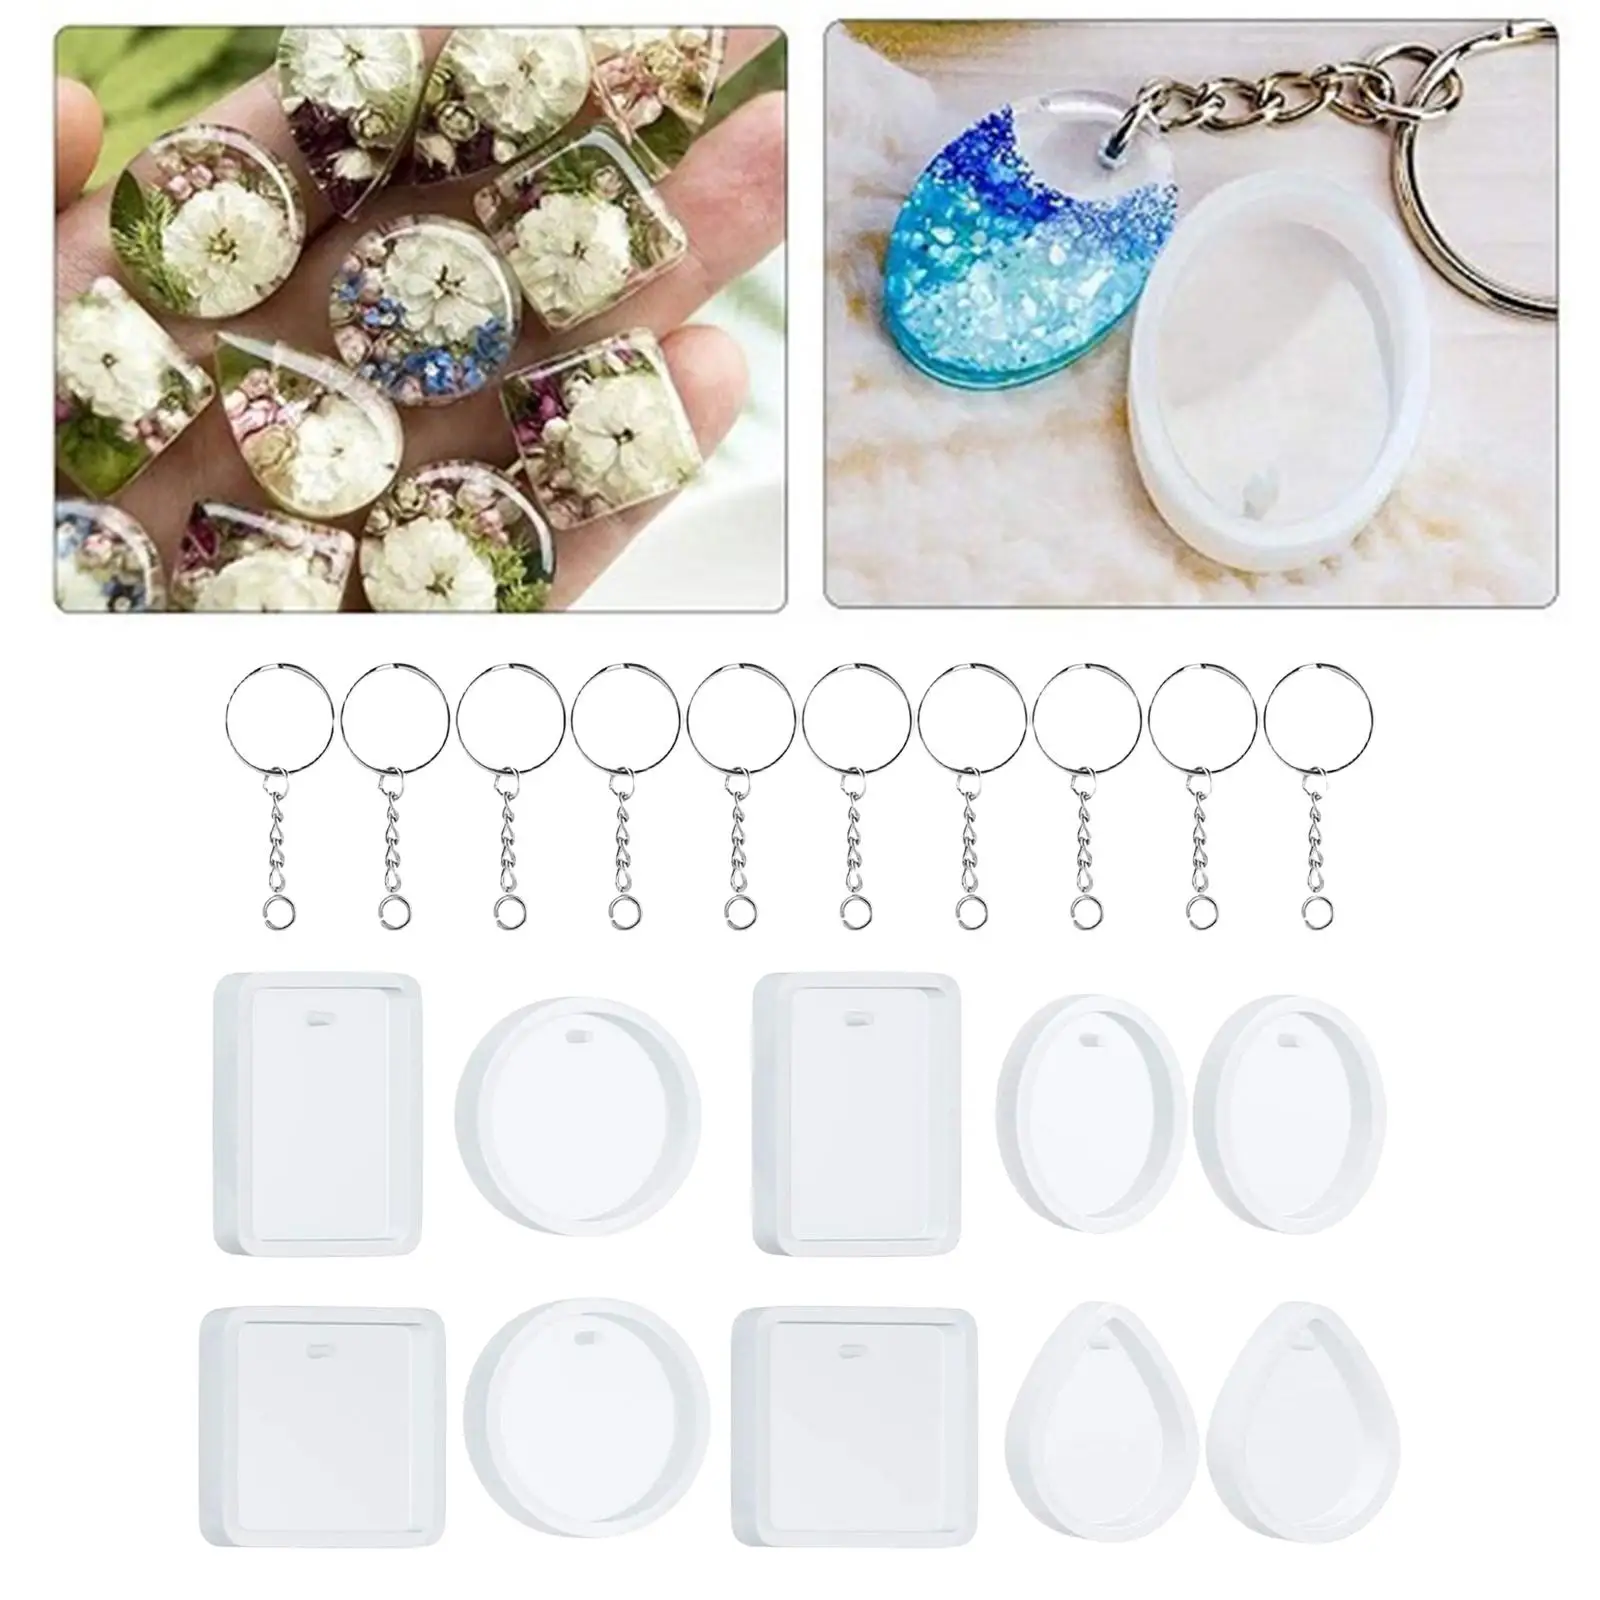 20 Pieces DIY Keychain Pendant Casting  Drop Shape with Keyrings 5 Shapes  for Keychain Pendants  Crafts Gifts